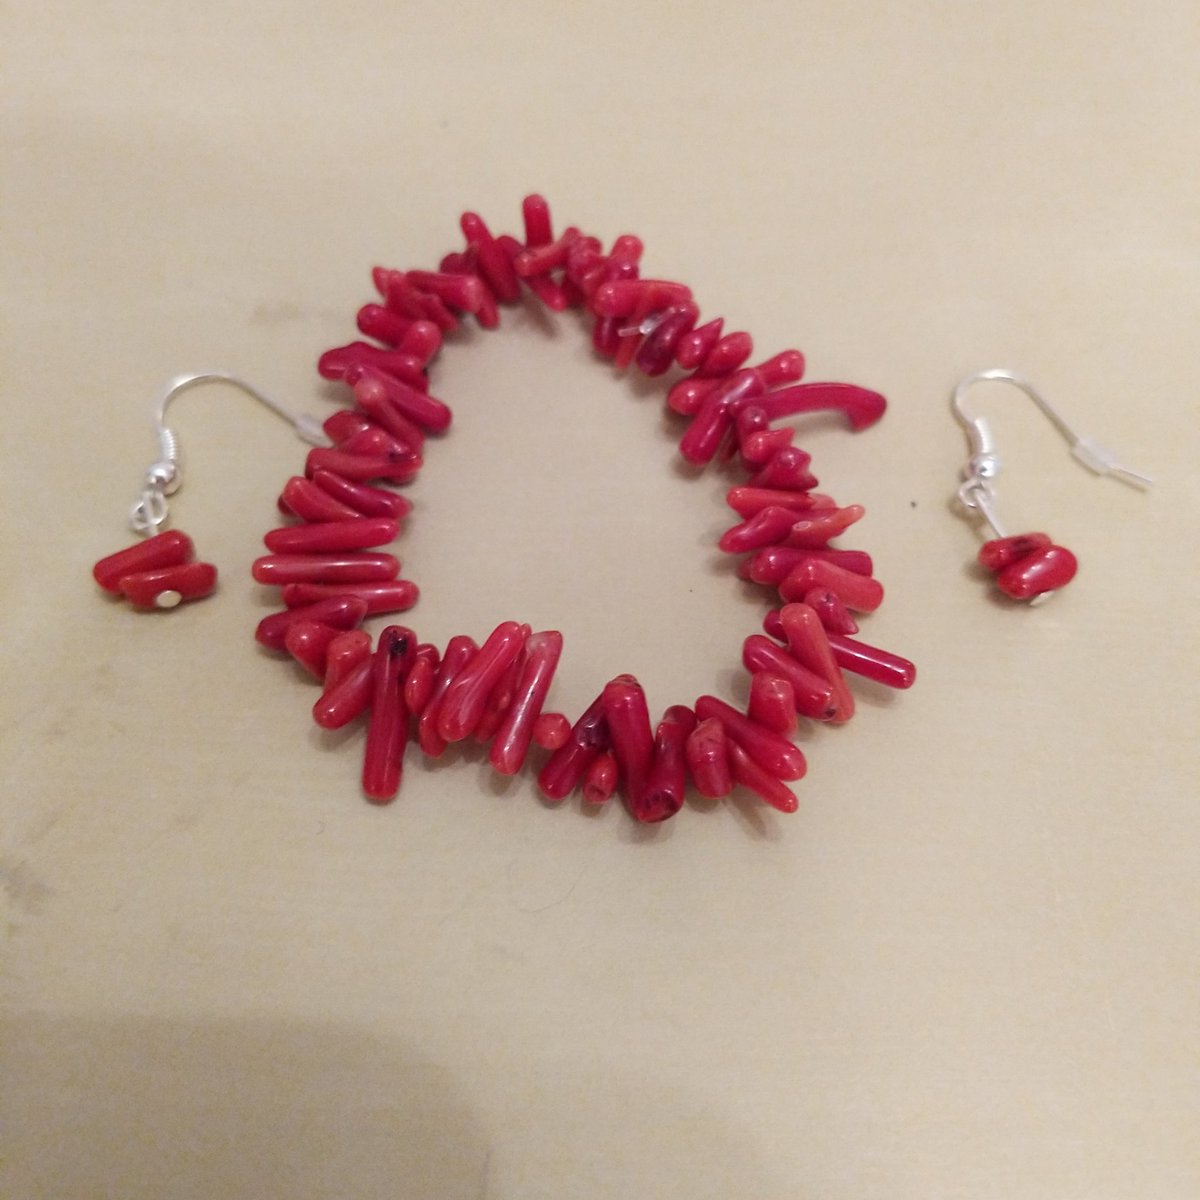 Instead if you dont want a free piece of jewellery (see last post) then this NEW set is for you!!
.
.Red coral beaded bracelet and earring set!  Available NOW on both Etsy AND @numondaycom .  Link in bio!
.
.
. #coralbracelet #coralearrings #redcoral #beachdays #beachjewellery